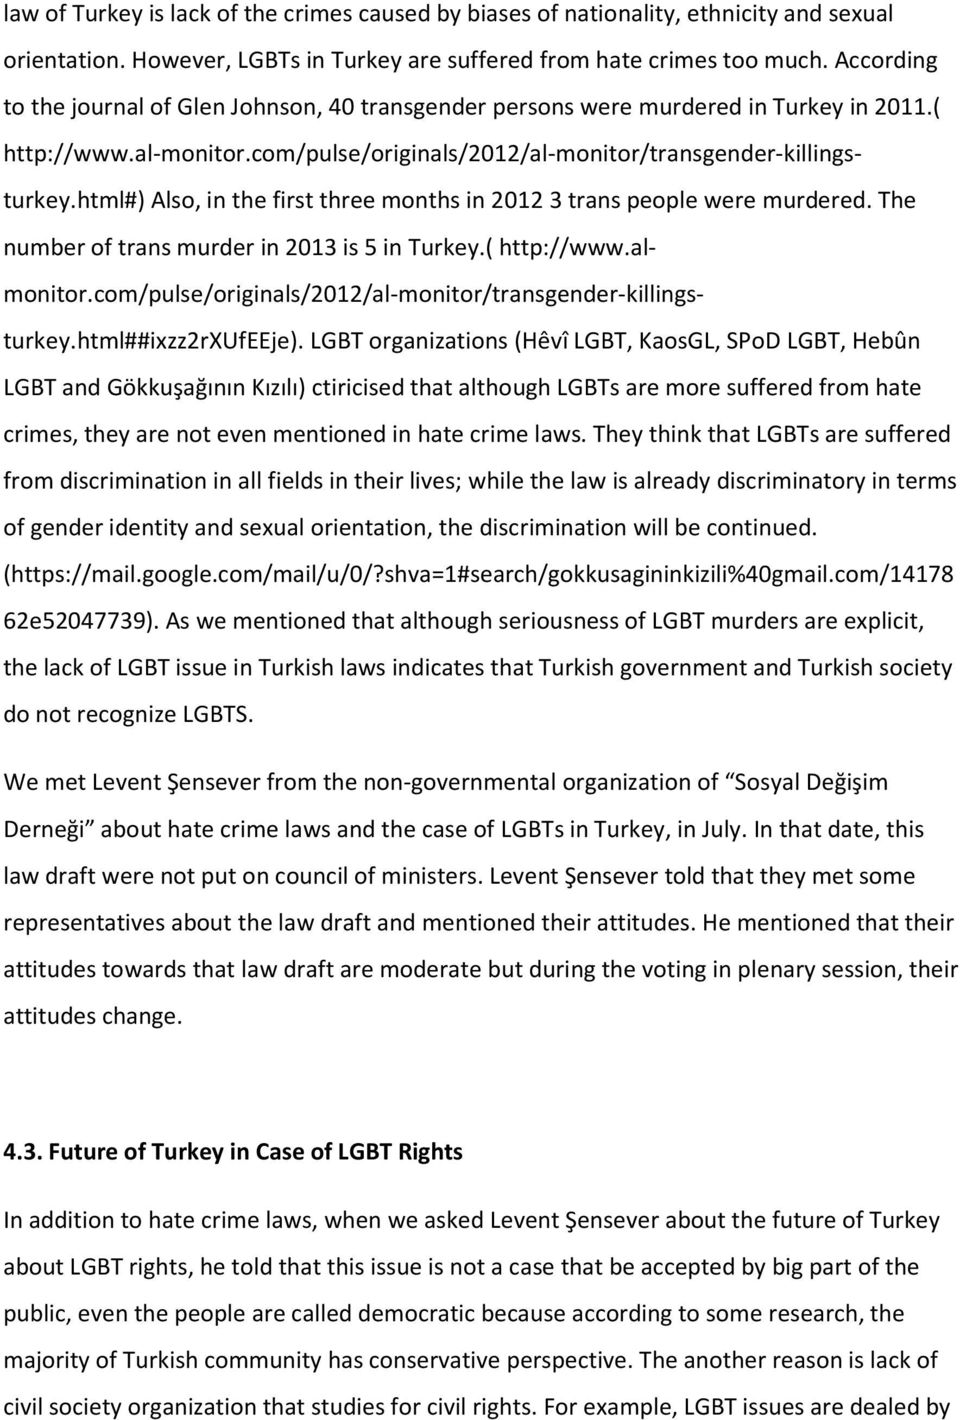 html#) Also, in the first three months in 20123 trans people were murdered. The number of trans murder in 2013 is 5 in Turkey.( http://www.almonitor.